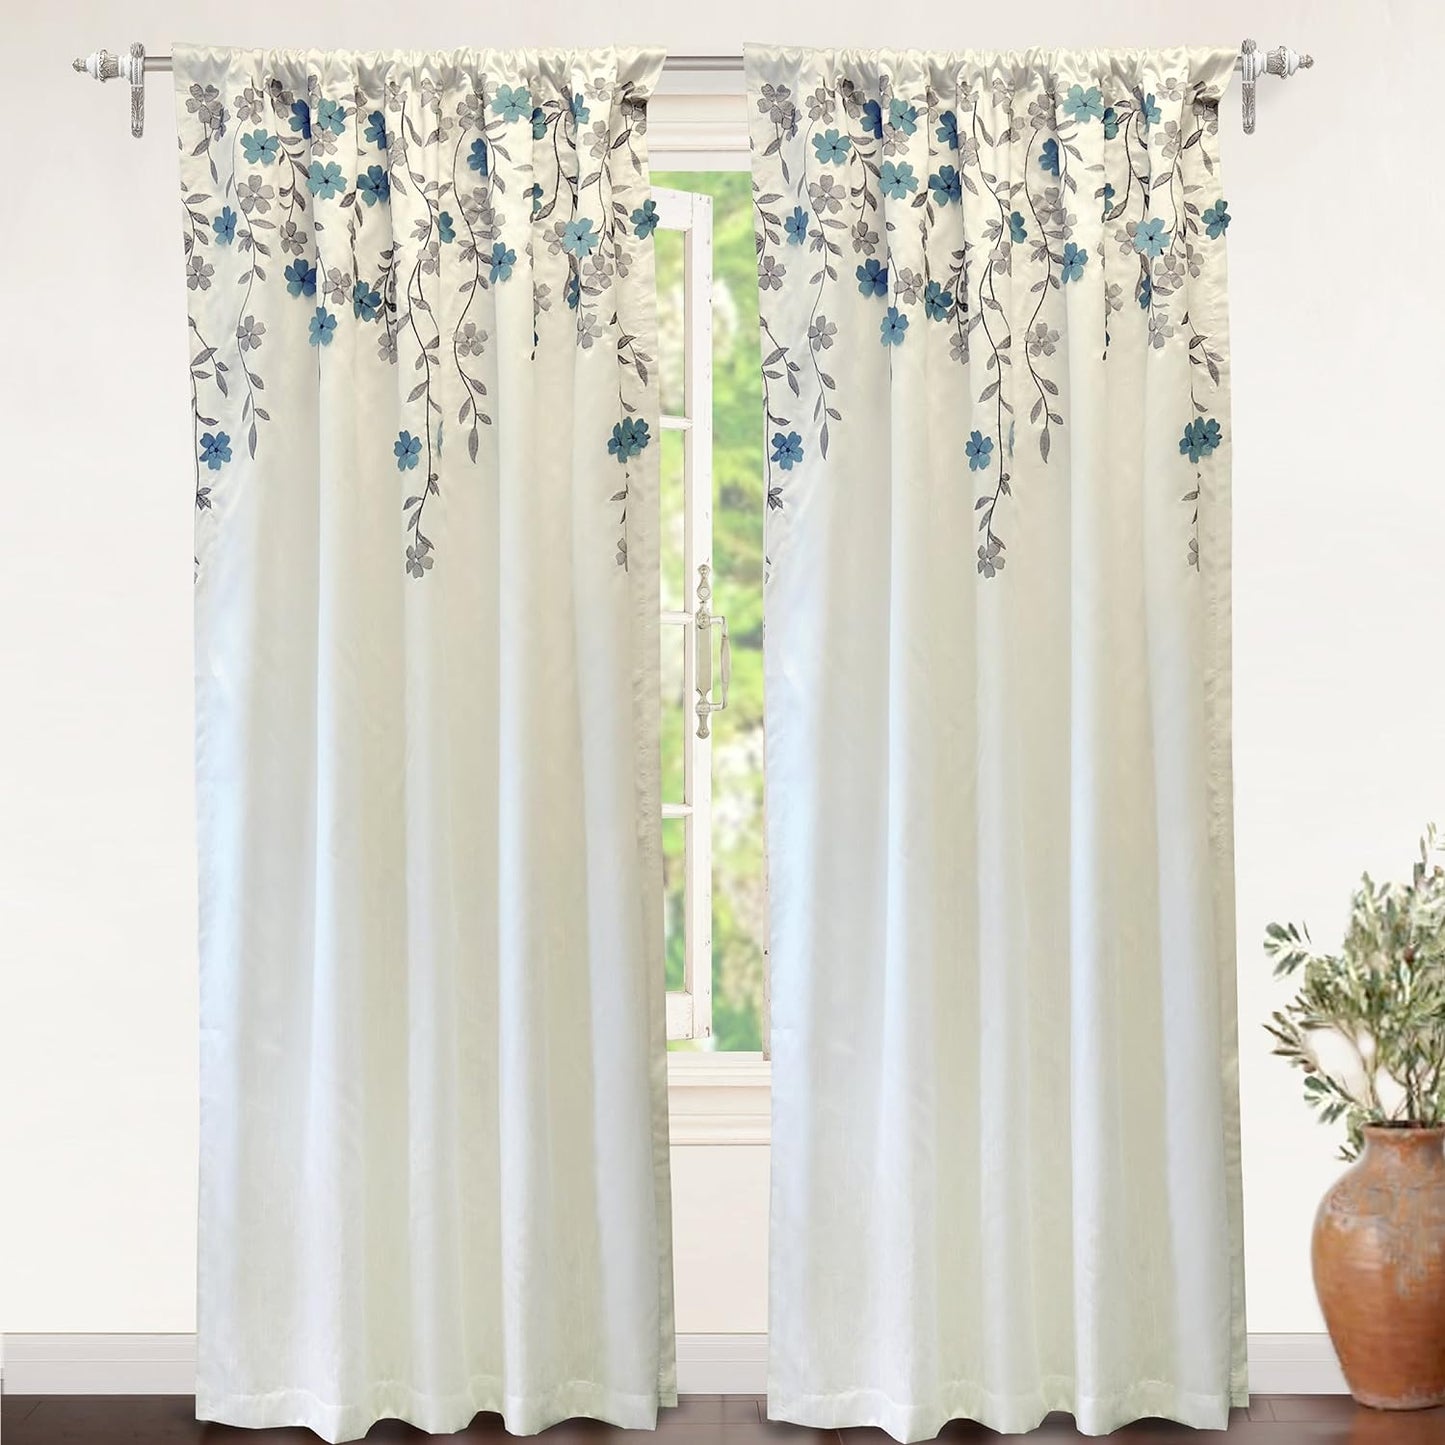 Driftaway Aubree Weeping Flower Print Thermal Room Darkening Privacy Window Curtain for Bedroom Living Room Rod Pocket 2 Panels 52 Inch by 84 Inch Blue  DriftAway One Panel Ivory Blue 50"X96" 